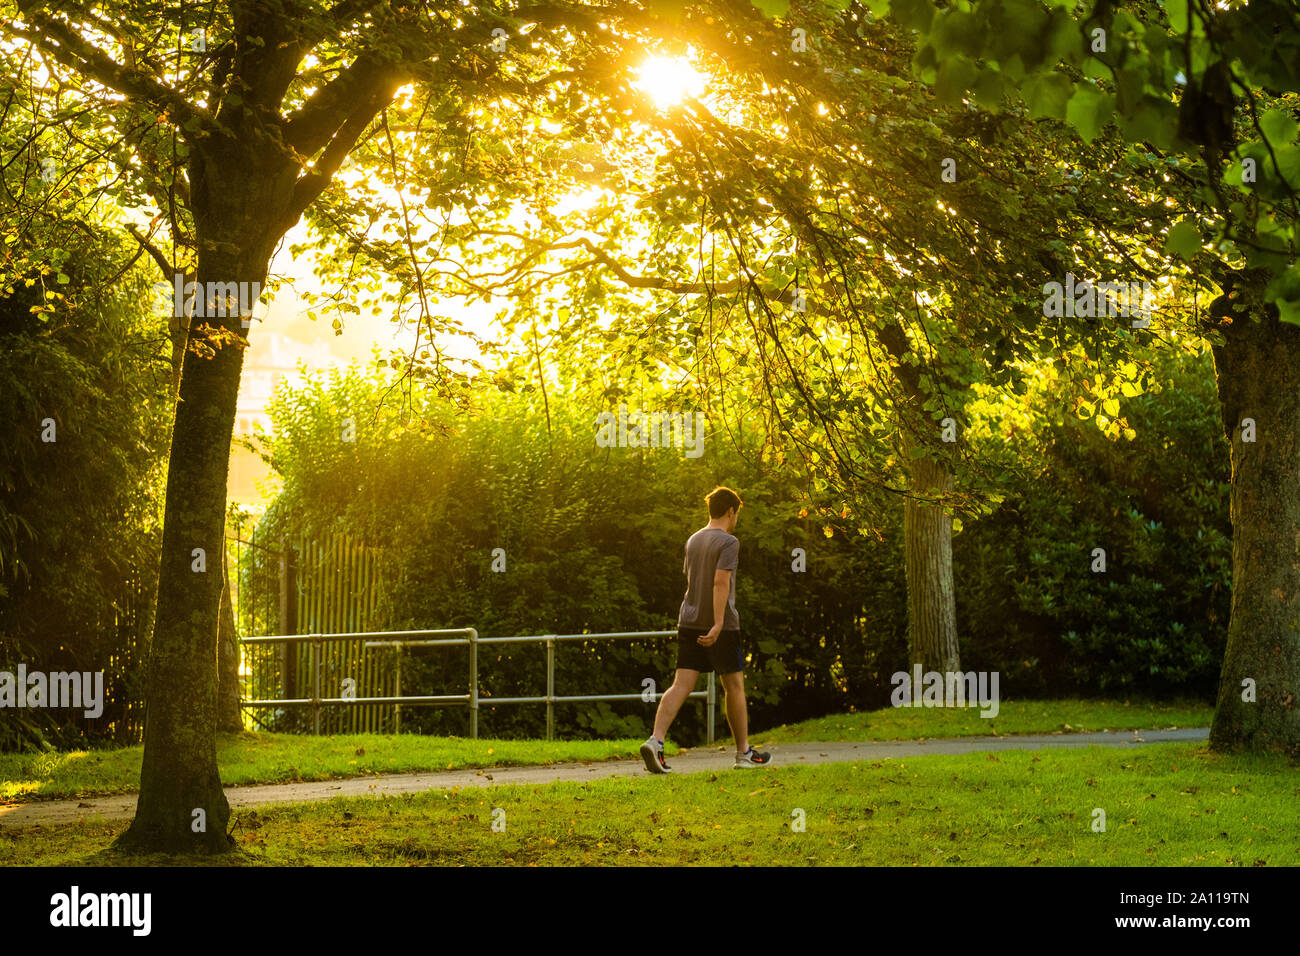 Aberystwyth, Wales, UK. 23rd Sept, 2019. UK Weather: A man walking down Plascrug Avenue at daybreak on a bright and sunny Equinox morning, September 23 2019, the first day of official autumn in the northern hemisphere. Today the length of the day and night are roughy equal. Photo Credit: keith morris/Alamy Live News Stock Photo